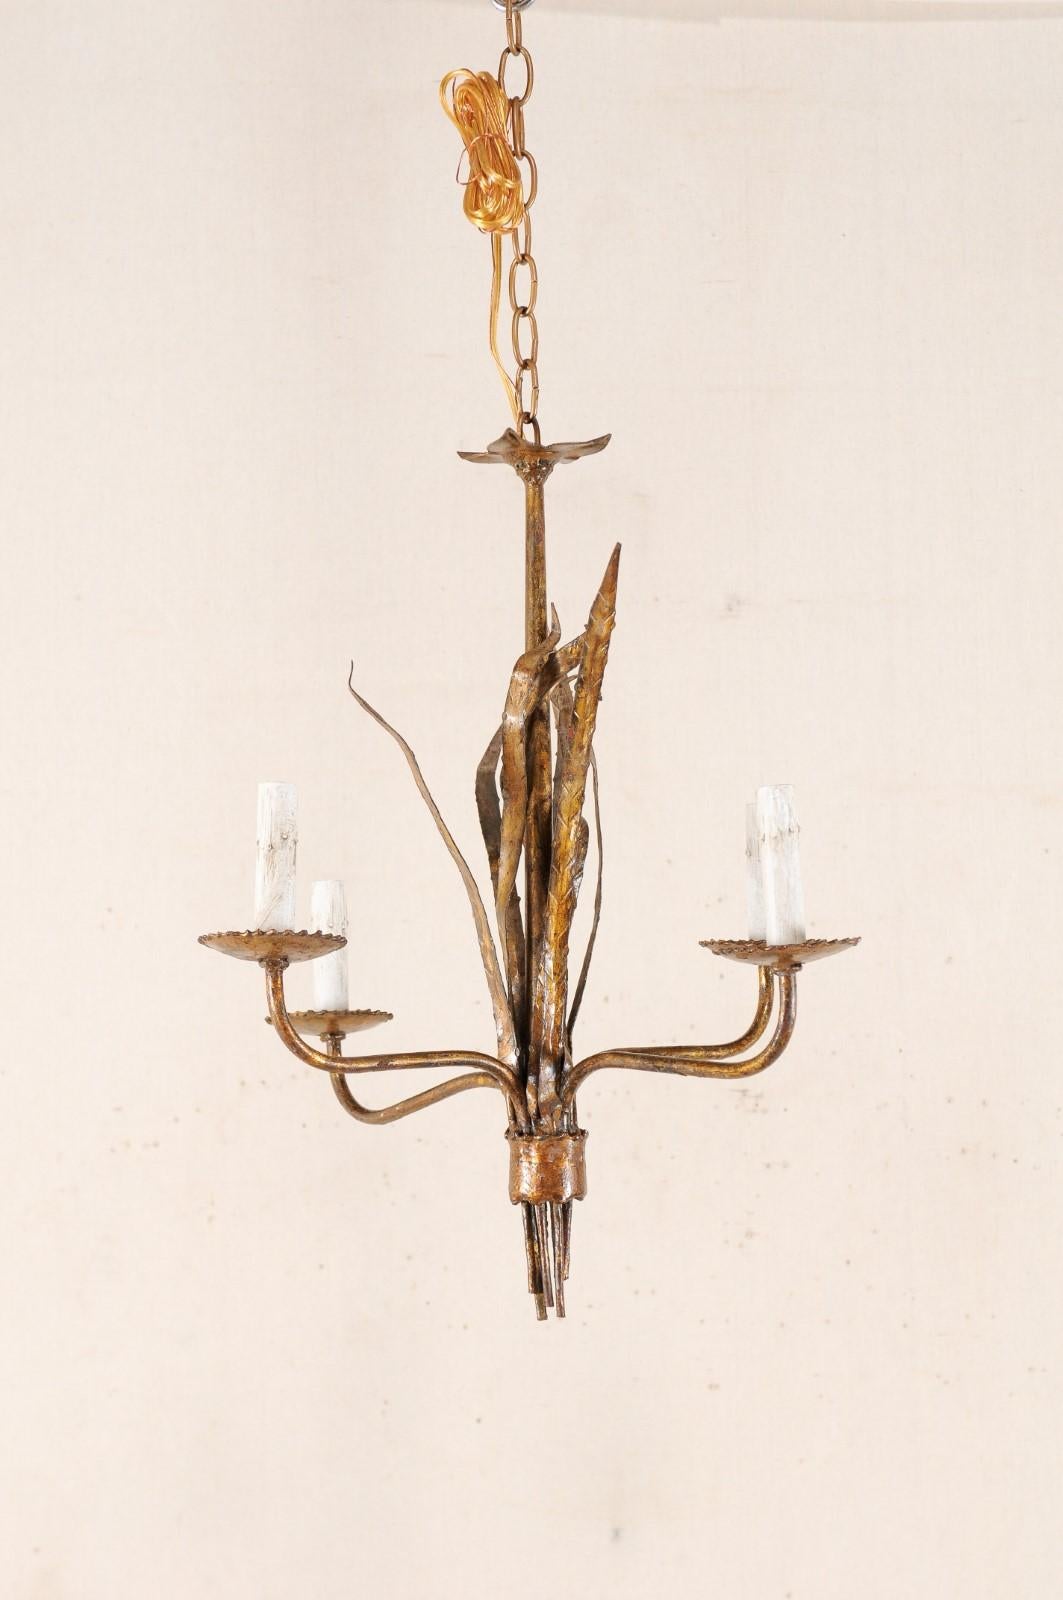 French Mid-20th Century Four-Light Iron Toned Chandelier in Leaf Foliage Motif For Sale 5